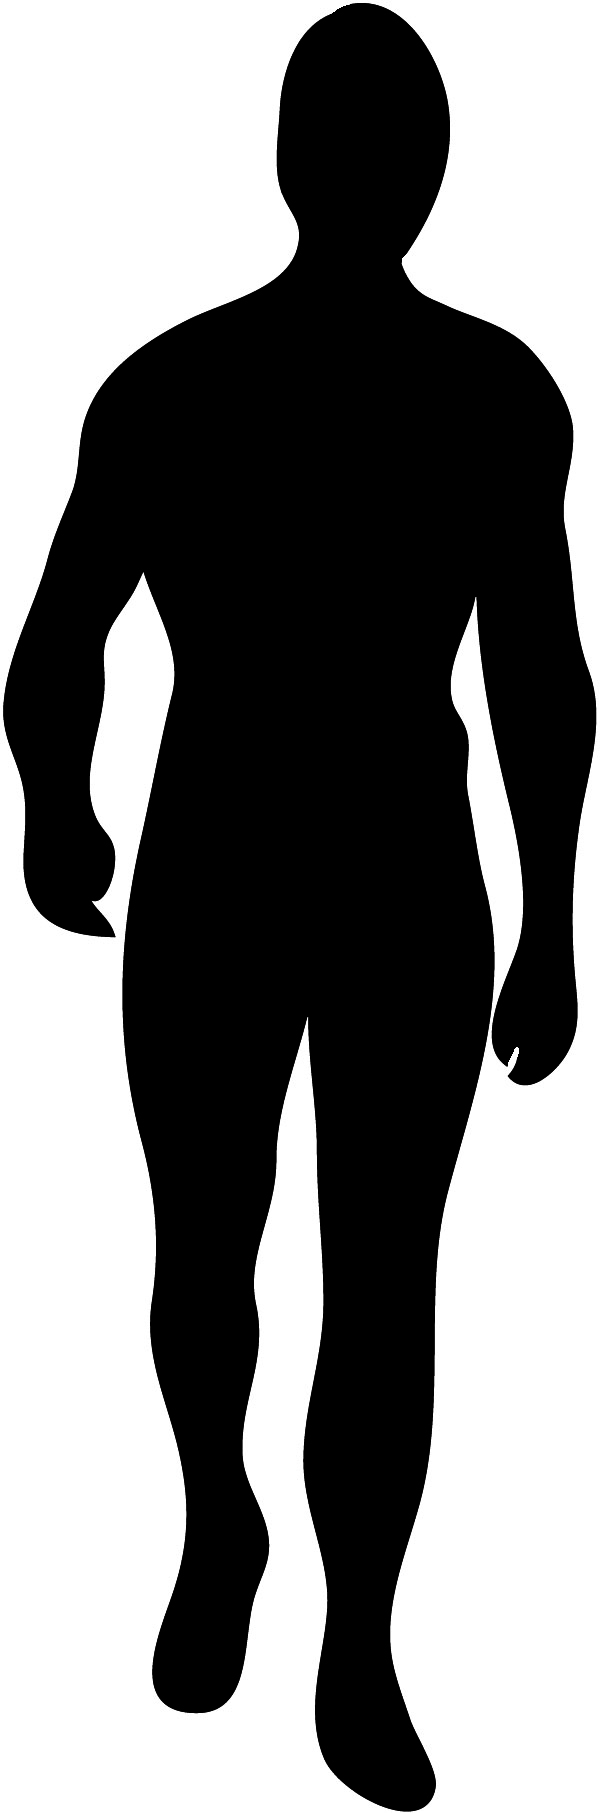 Have Made These Male Silhouettes And Female Silhouettes So That You